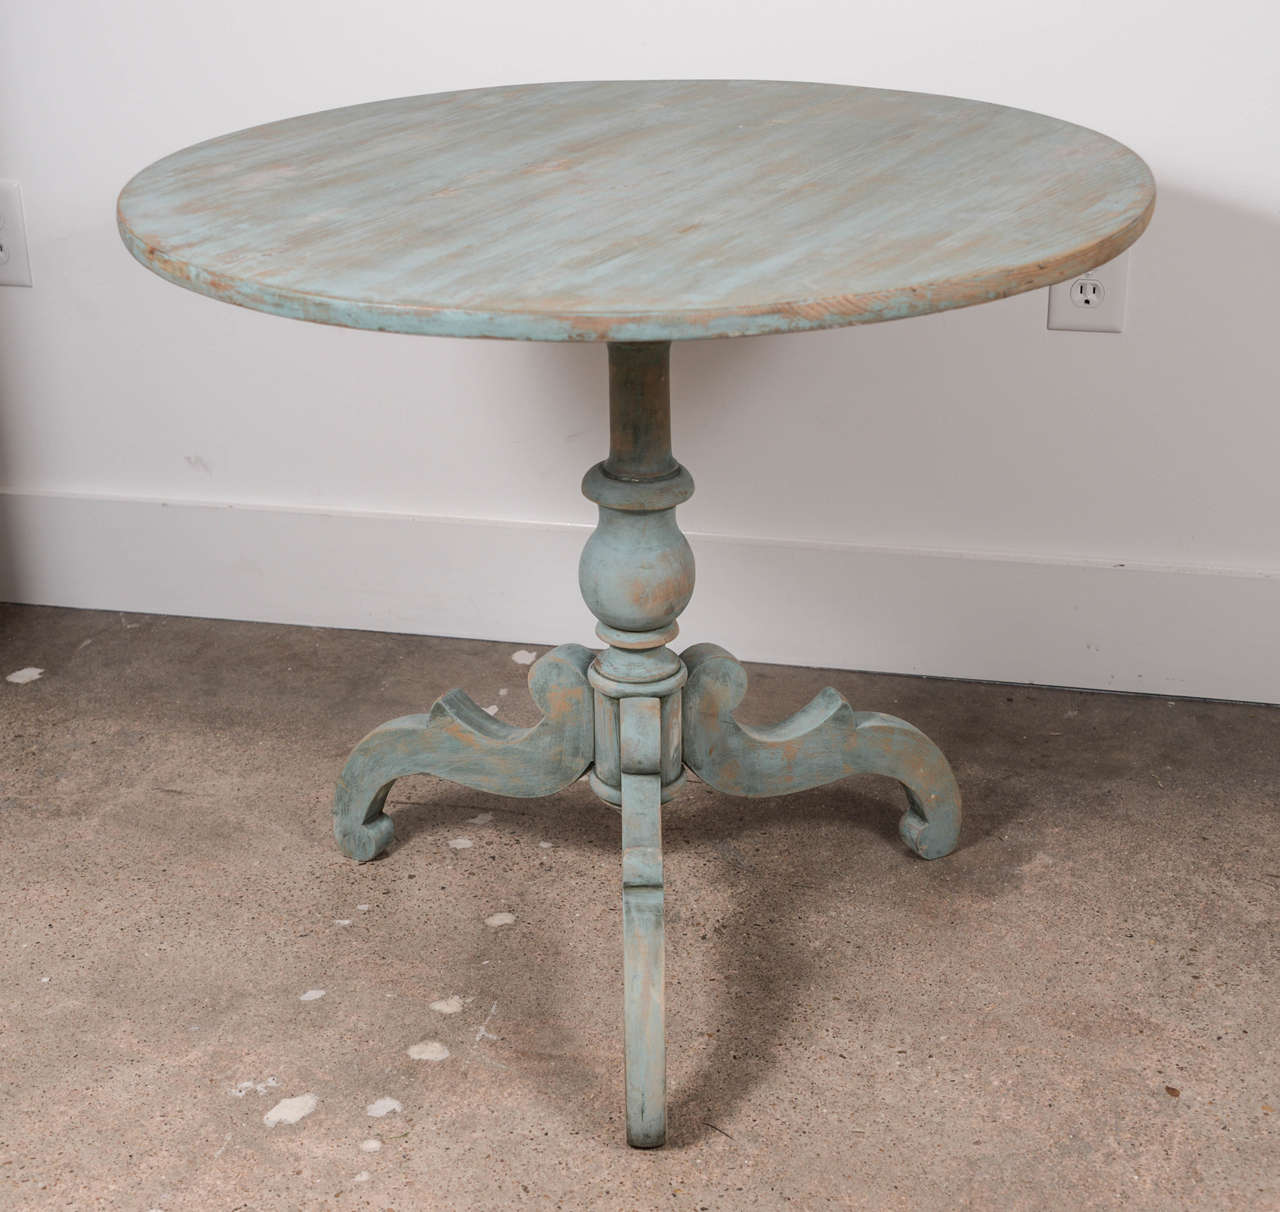 Decorative blue painted 19th century tilt-top pedestal table with a turned base supported by 3 scrolled feet.